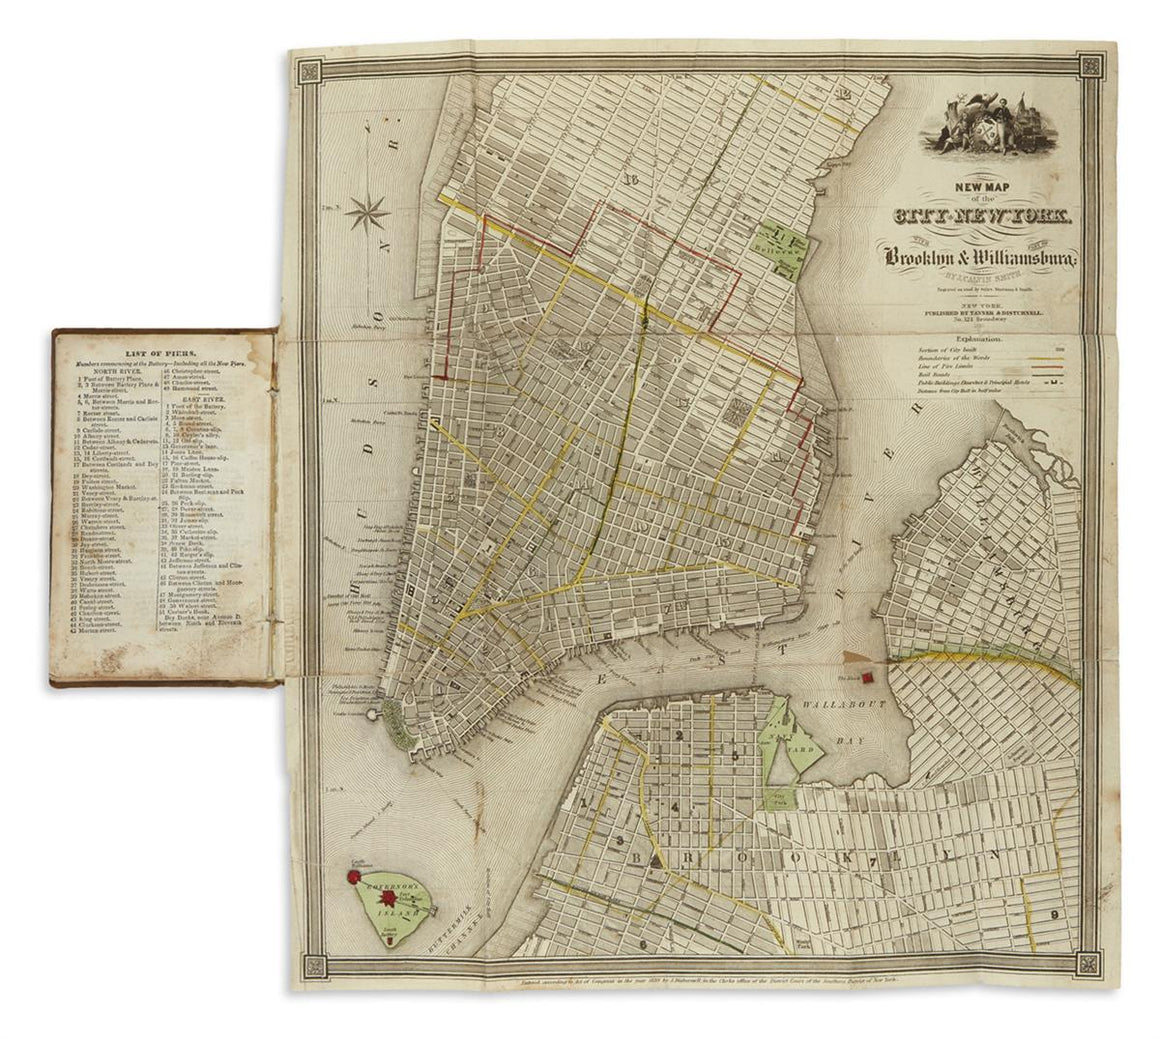 1840 "New Map of the City of New York With Part of Brooklyn & Williamsburg" by J. Calvin Smith